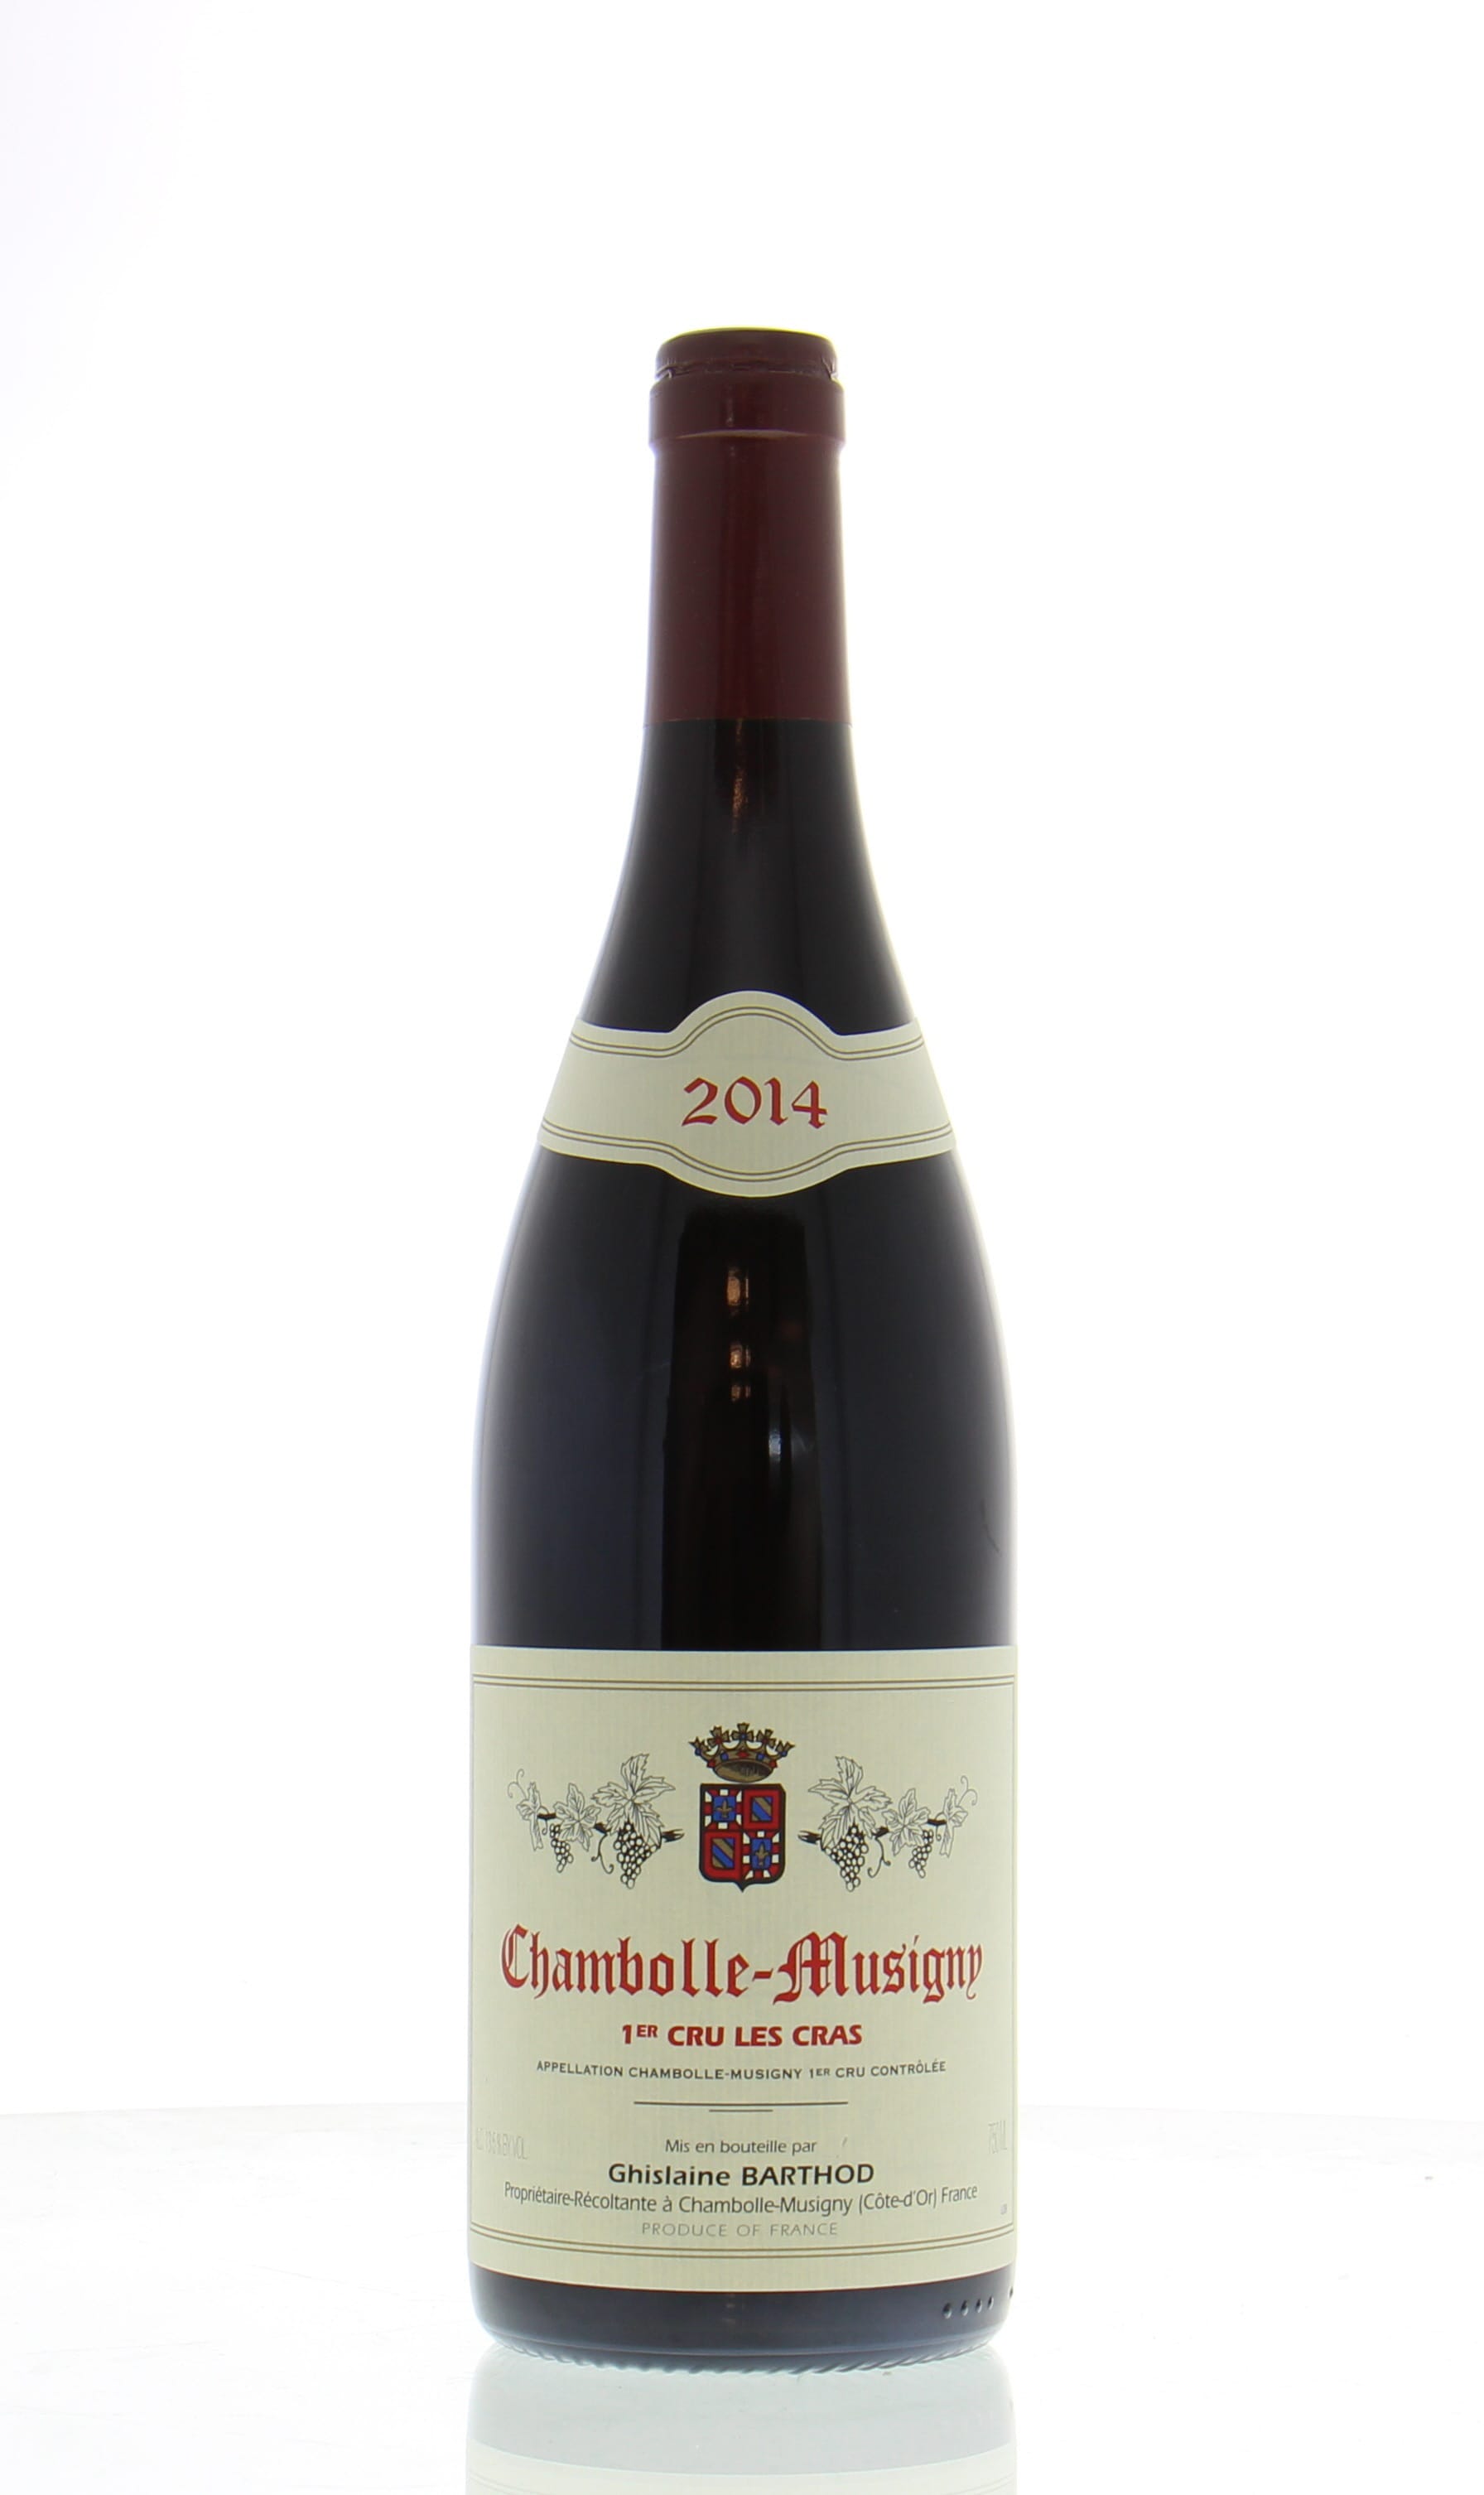 Ghislaine Barthod - Chambolle Musigny les Cras 2014 Perfect